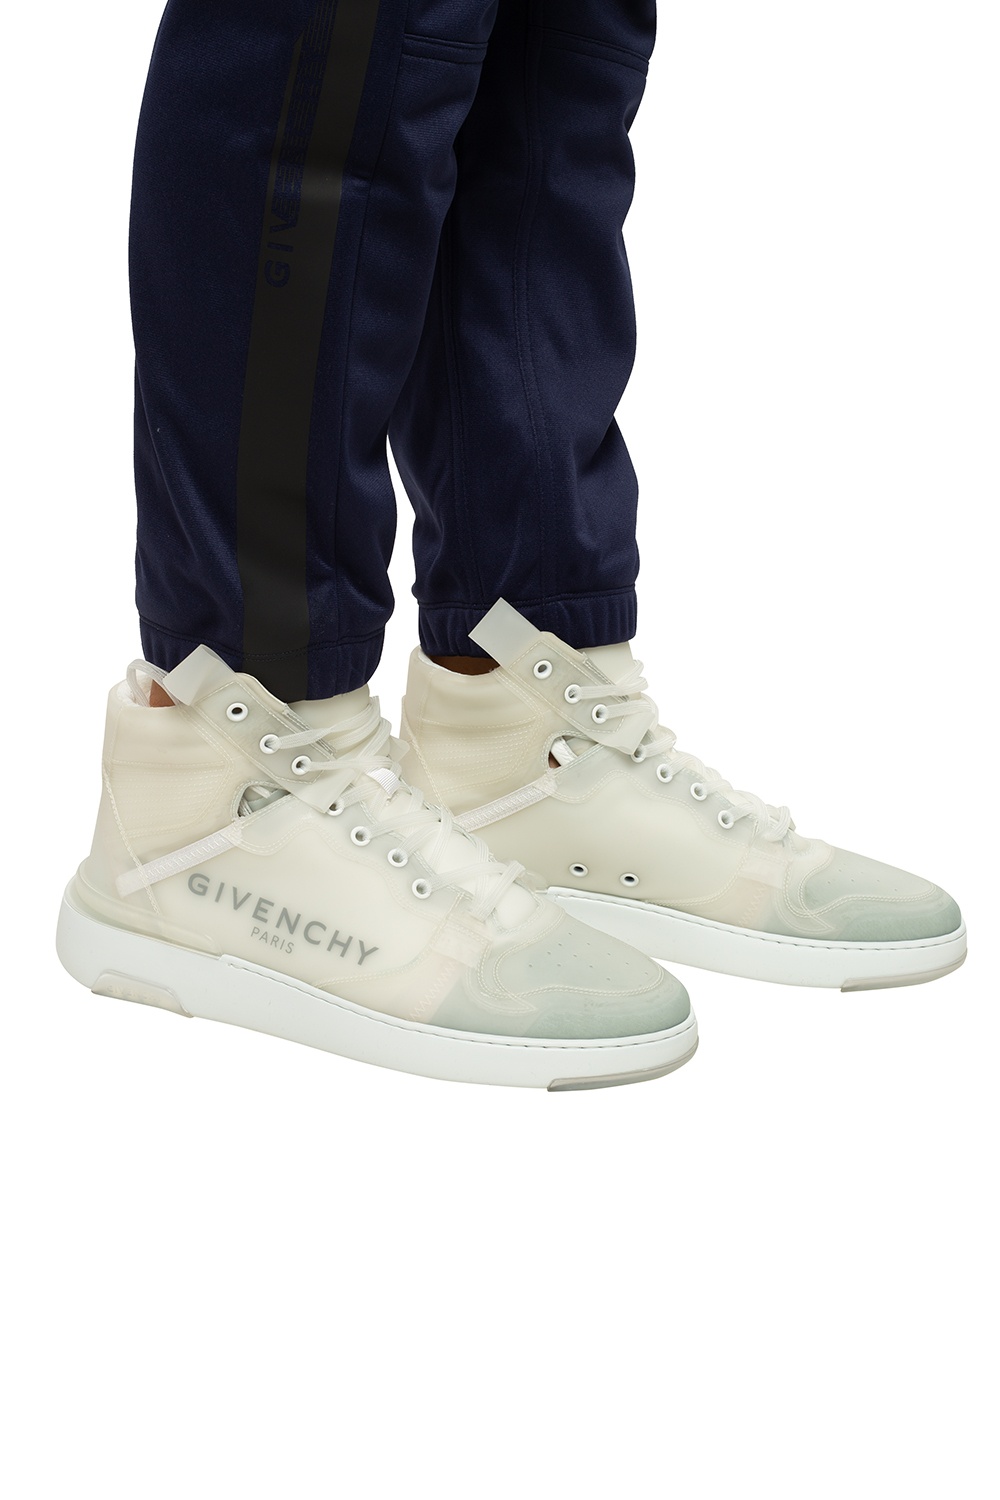 Givenchy 'Wing' logo sneakers | Men's Shoes | Vitkac